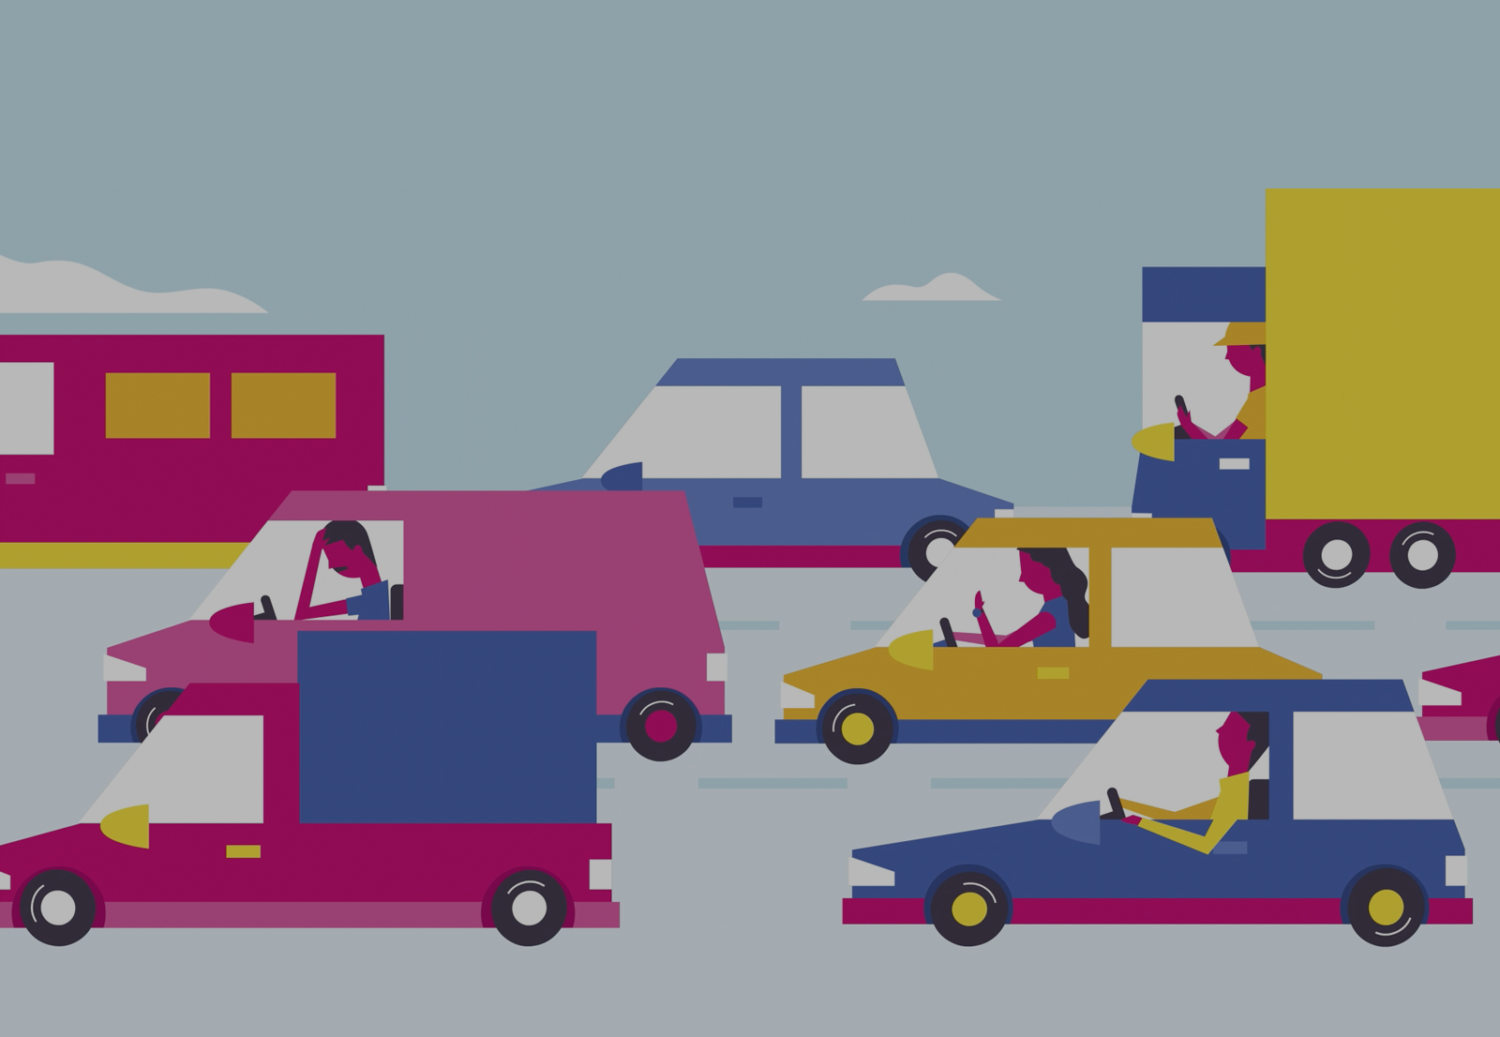 Still from the animation showing people waiting in heavy road traffic